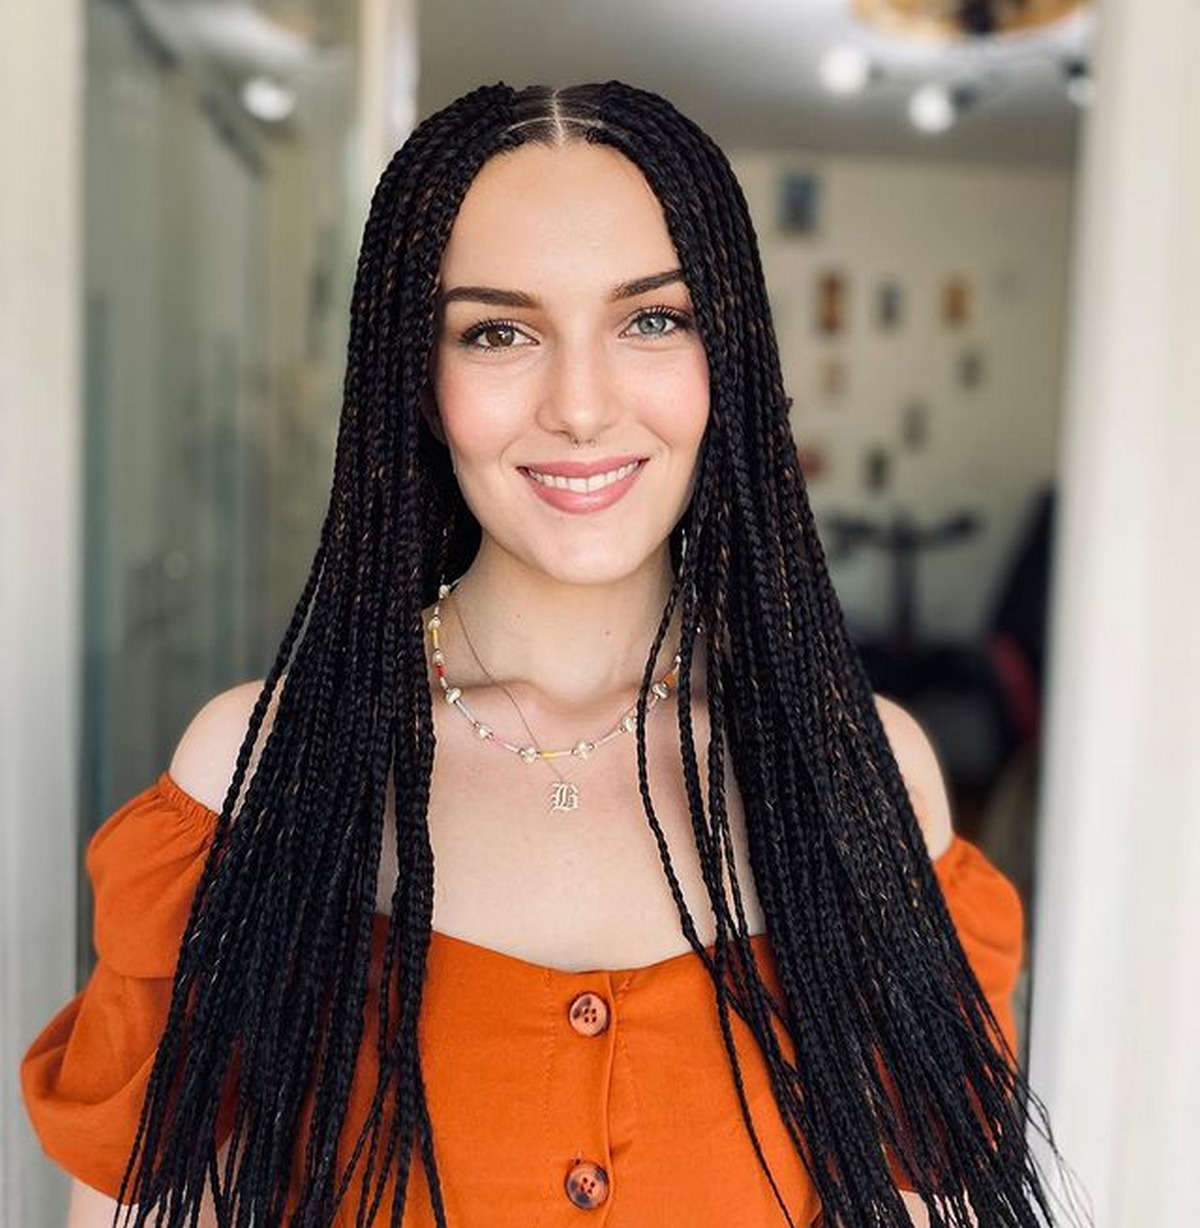 Long Black Dreadlock Hairstyles with Golden Highlights